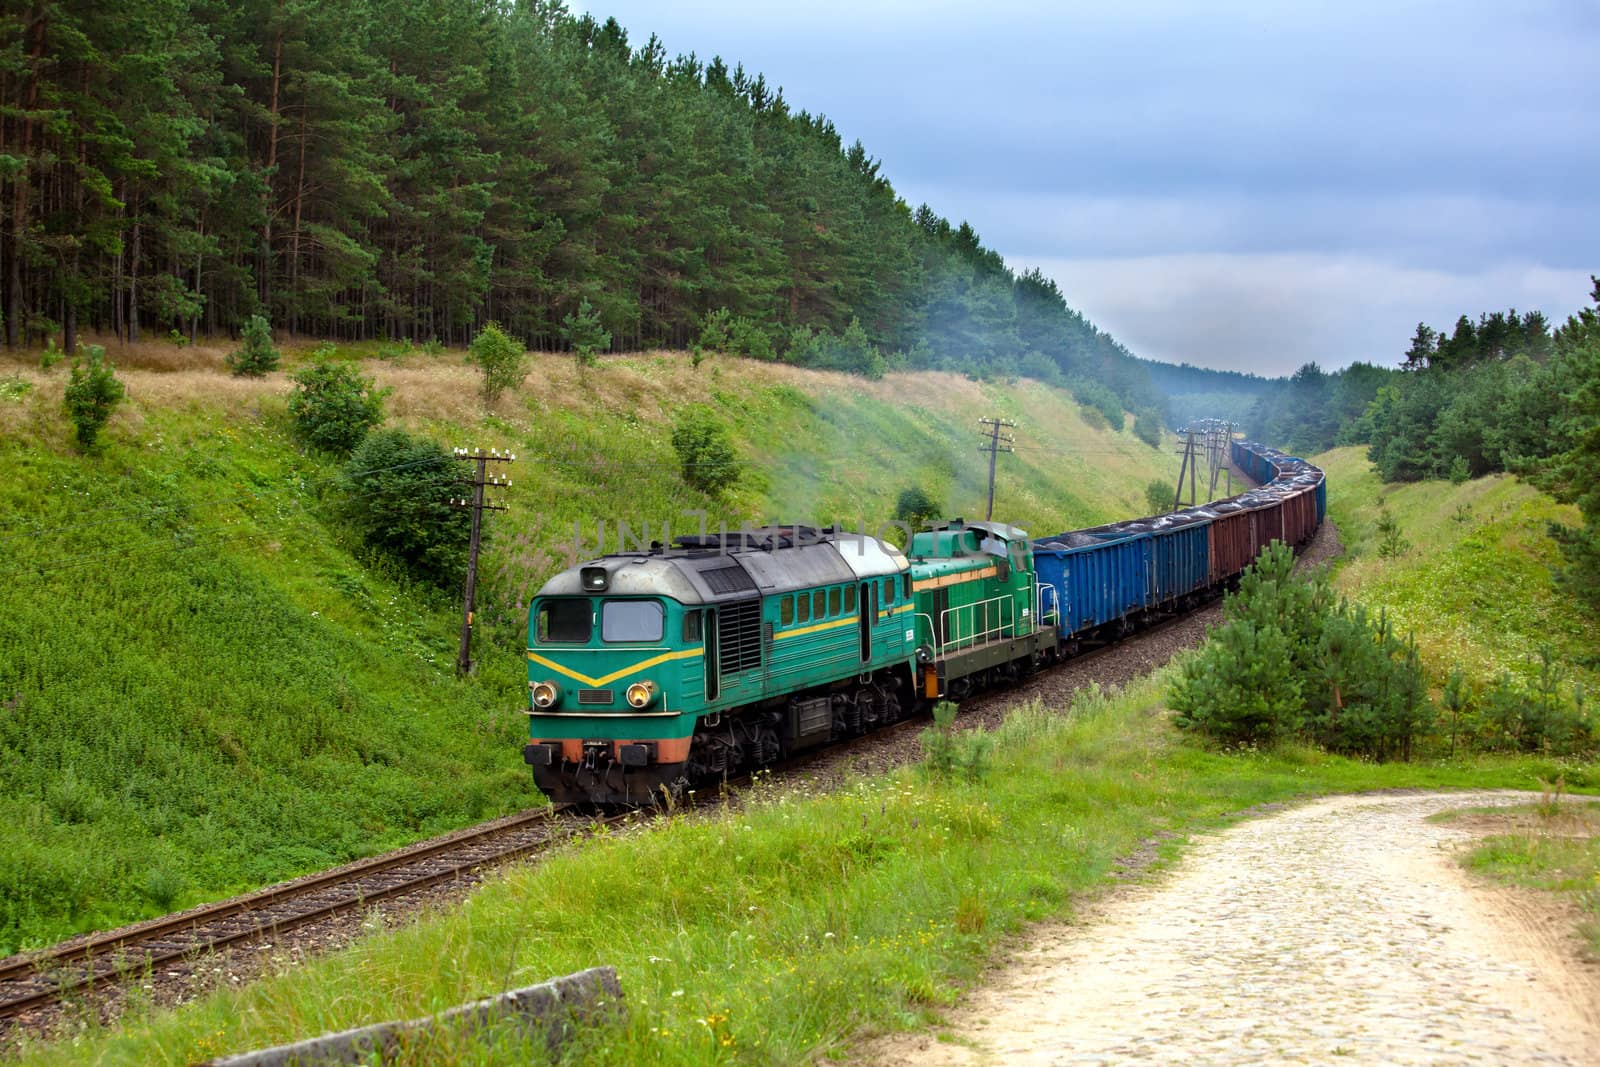 Freight train hauled by the diesel locomotives passing the forest
